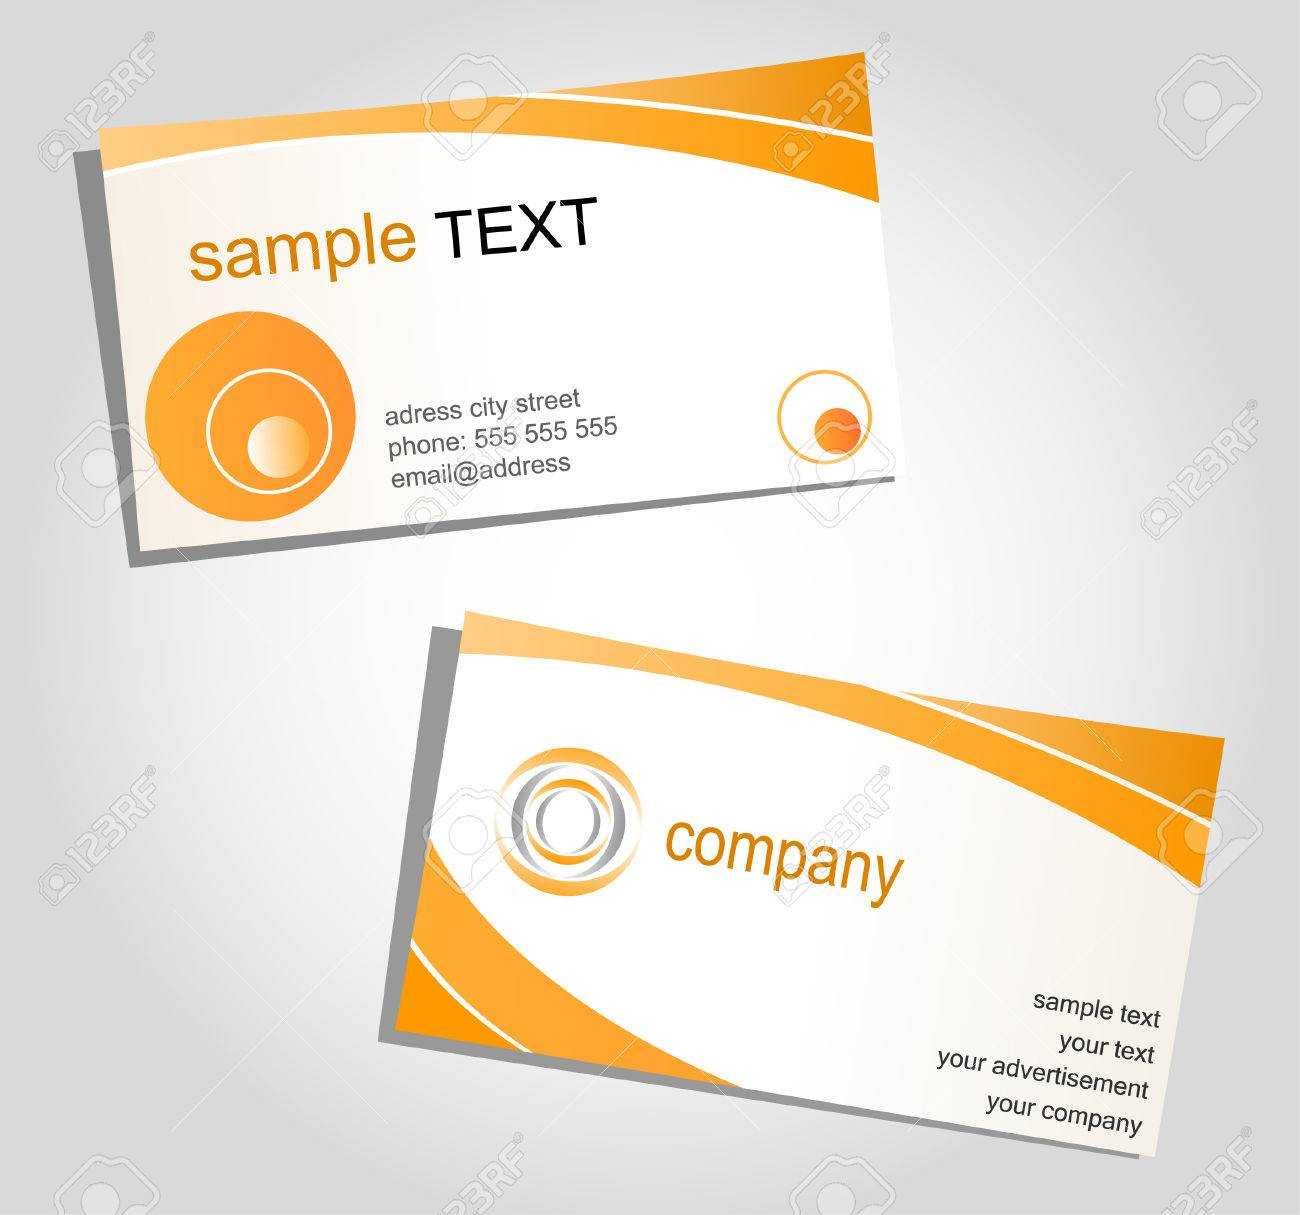 Templates For Visiting Cards ] – 100 Free Business Cards Psd Throughout Advocare Business Card Template